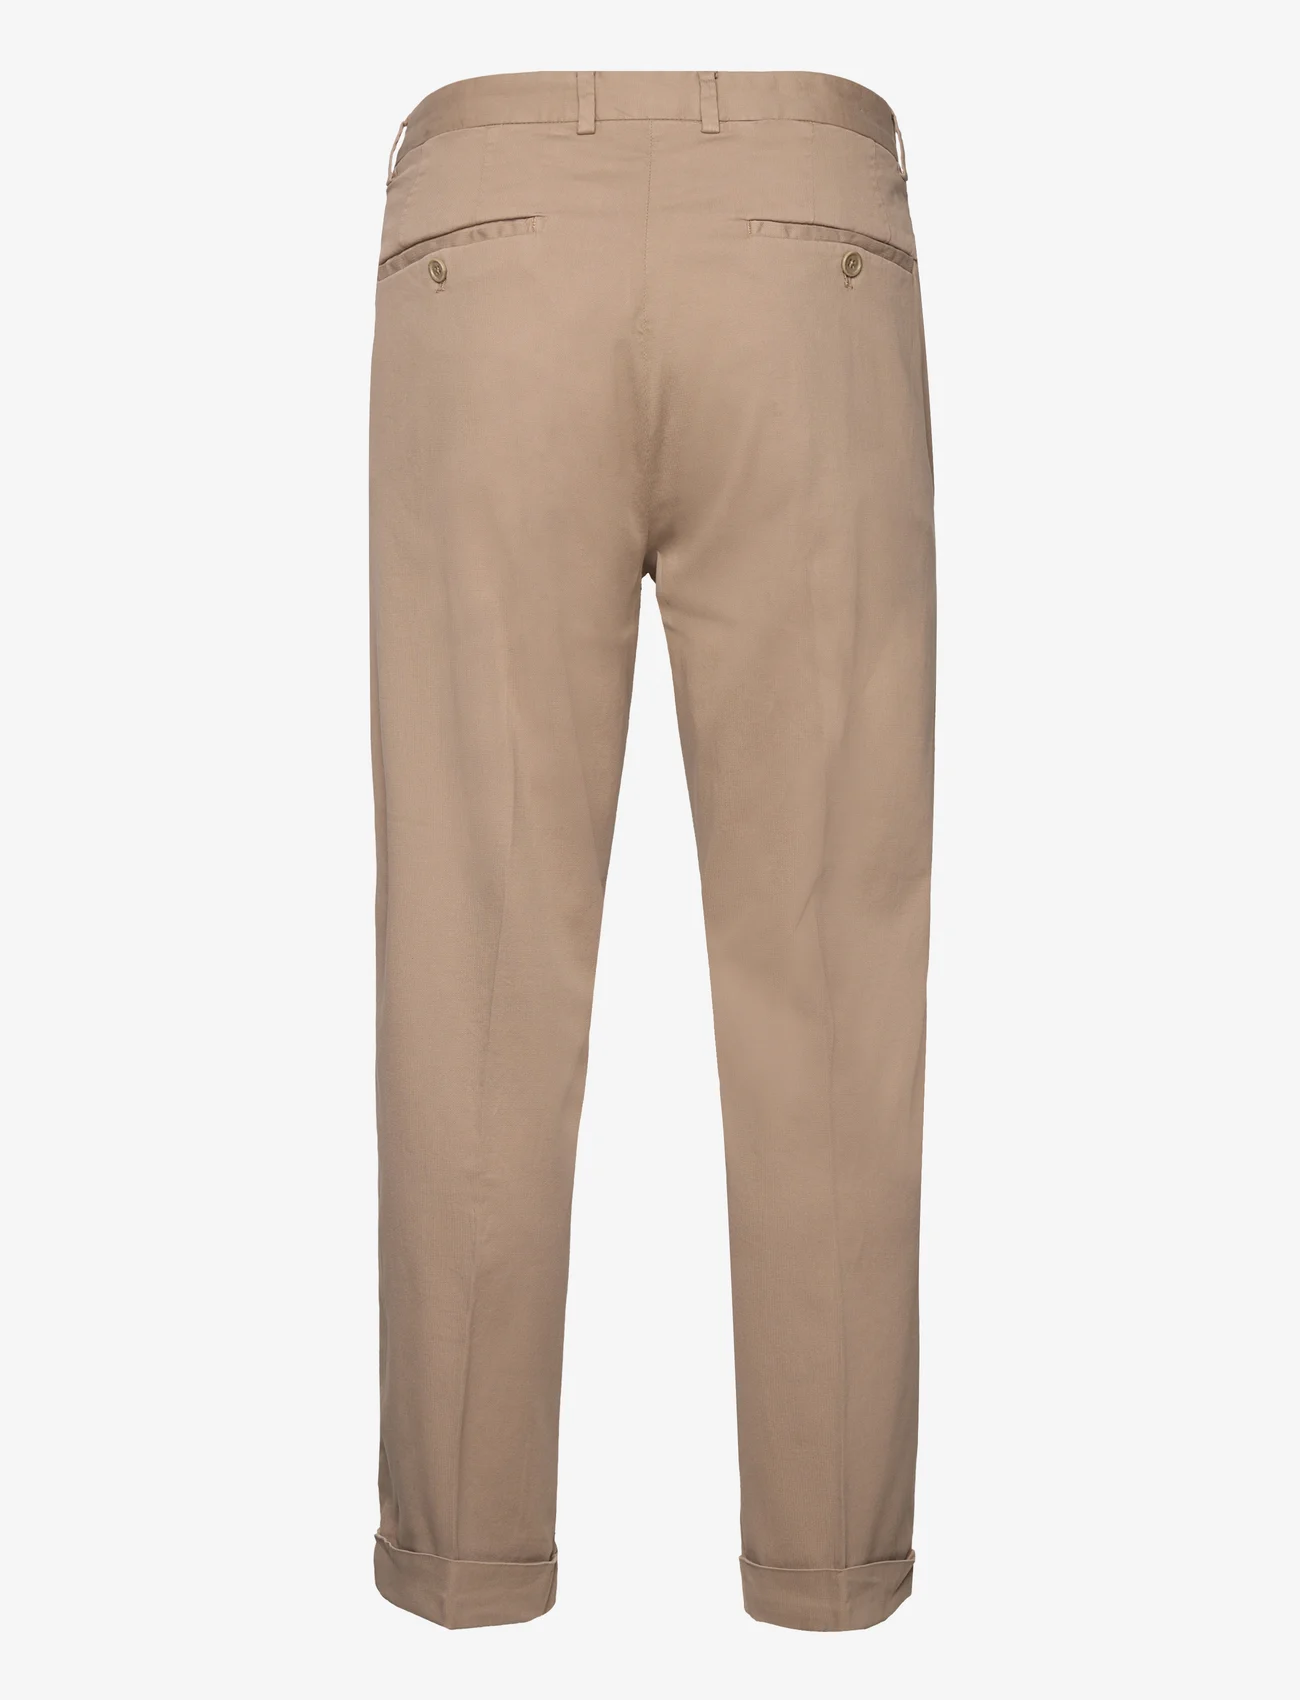 GANT - RELAXED TAPERED COTTON SUIT PANTS - chino stila bikses - taupe beige - 1